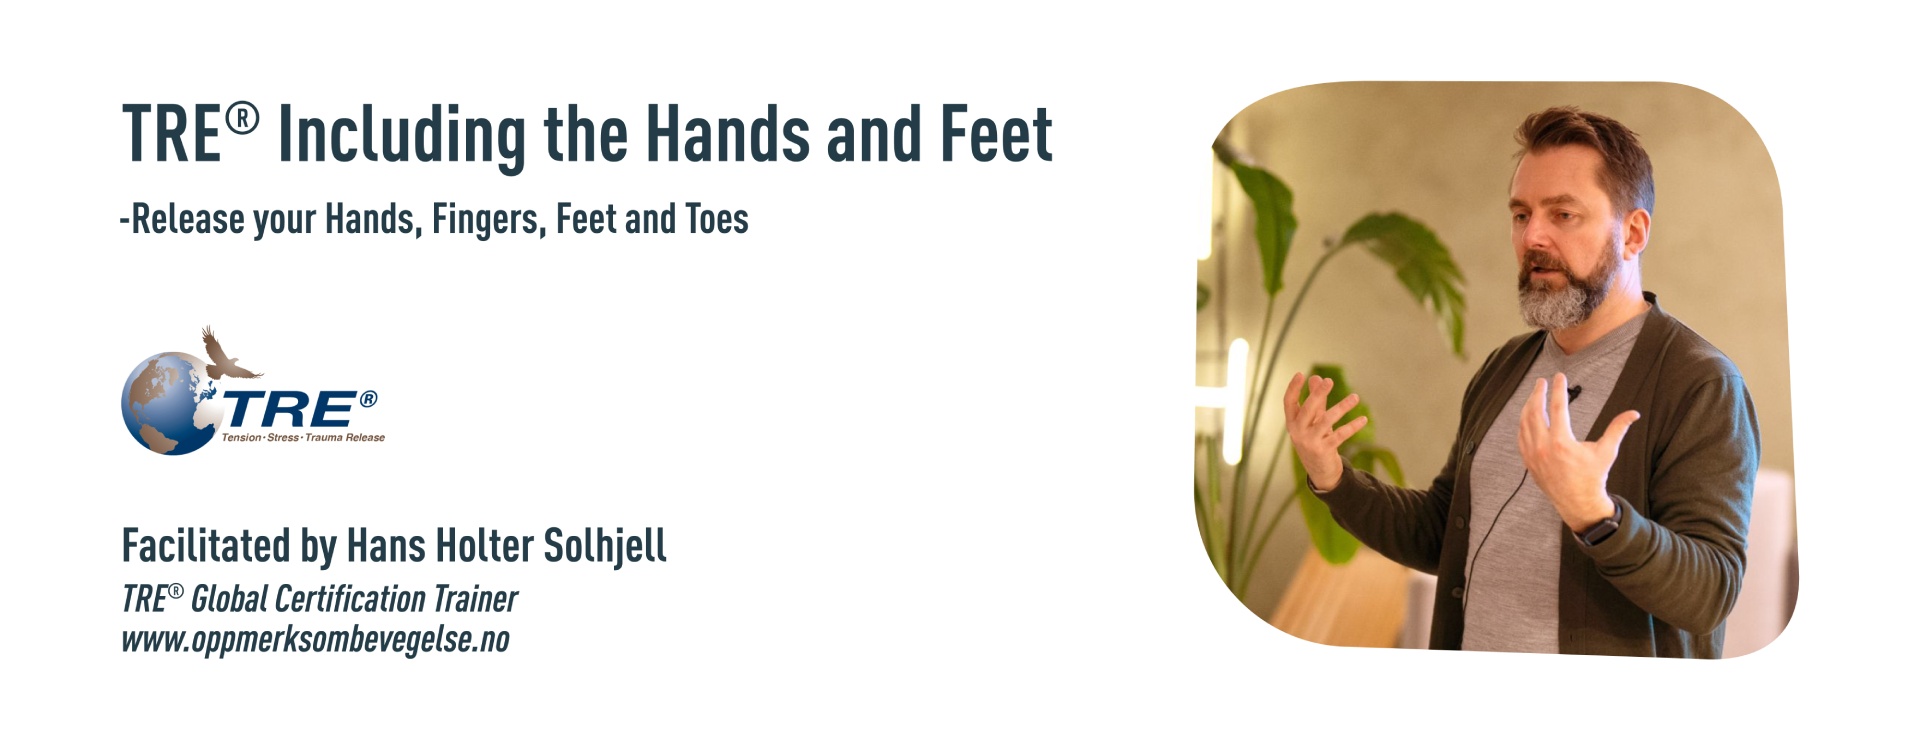 TRE® Including the Hands and Feet with Hans Holter Solhjell